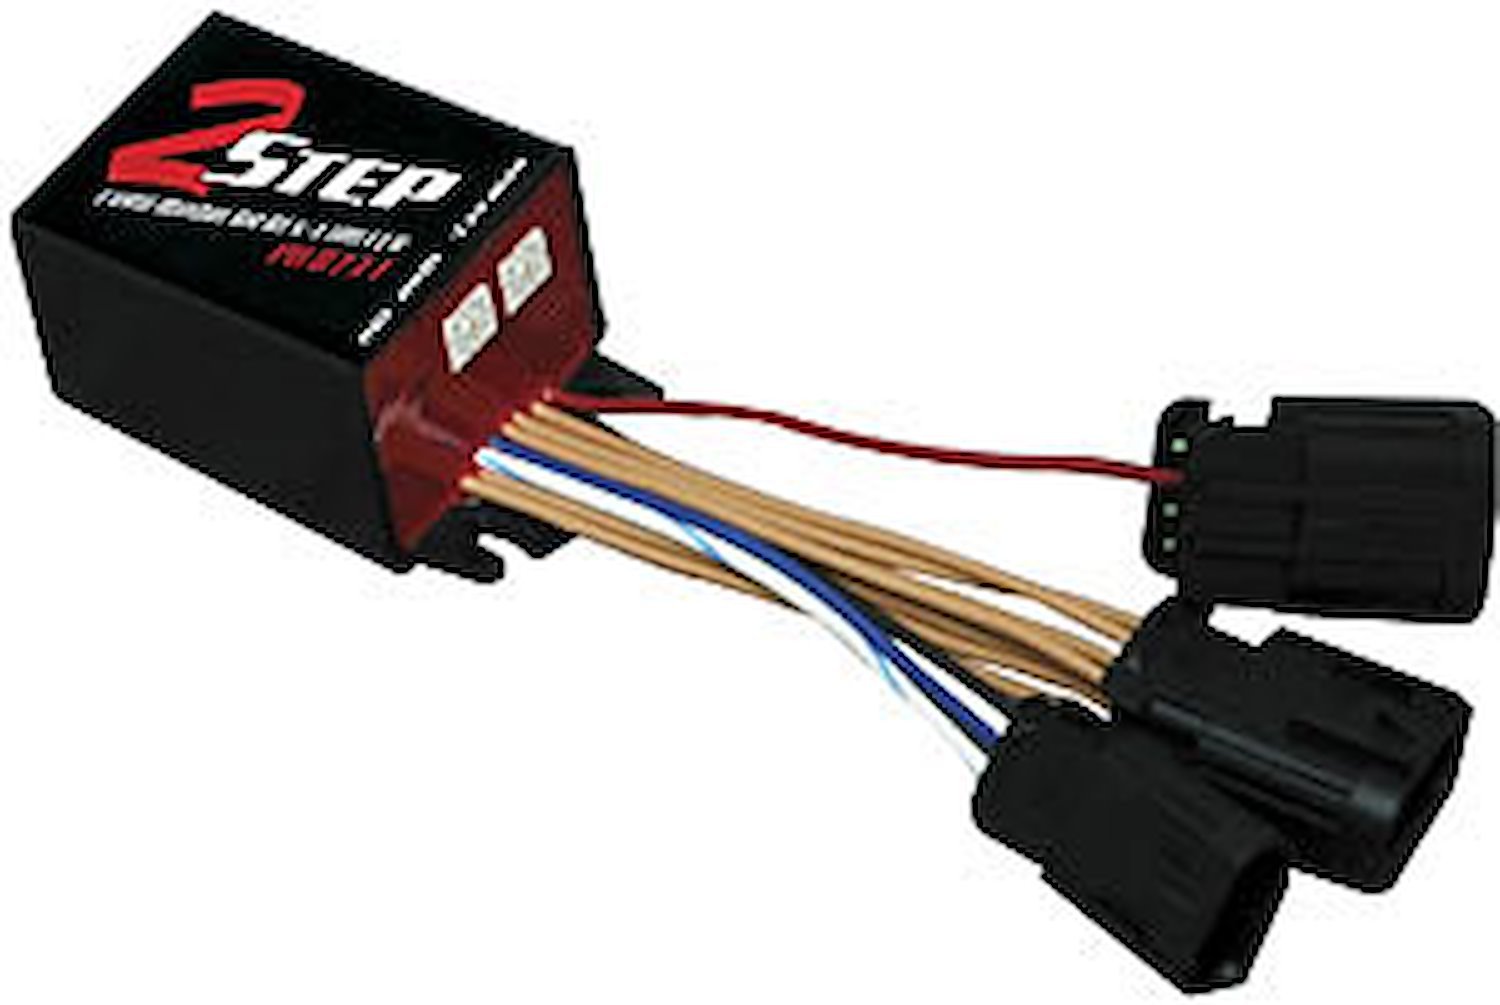 2-Step Launch Master RPM Controller 2011-2013 Ford 5.0L